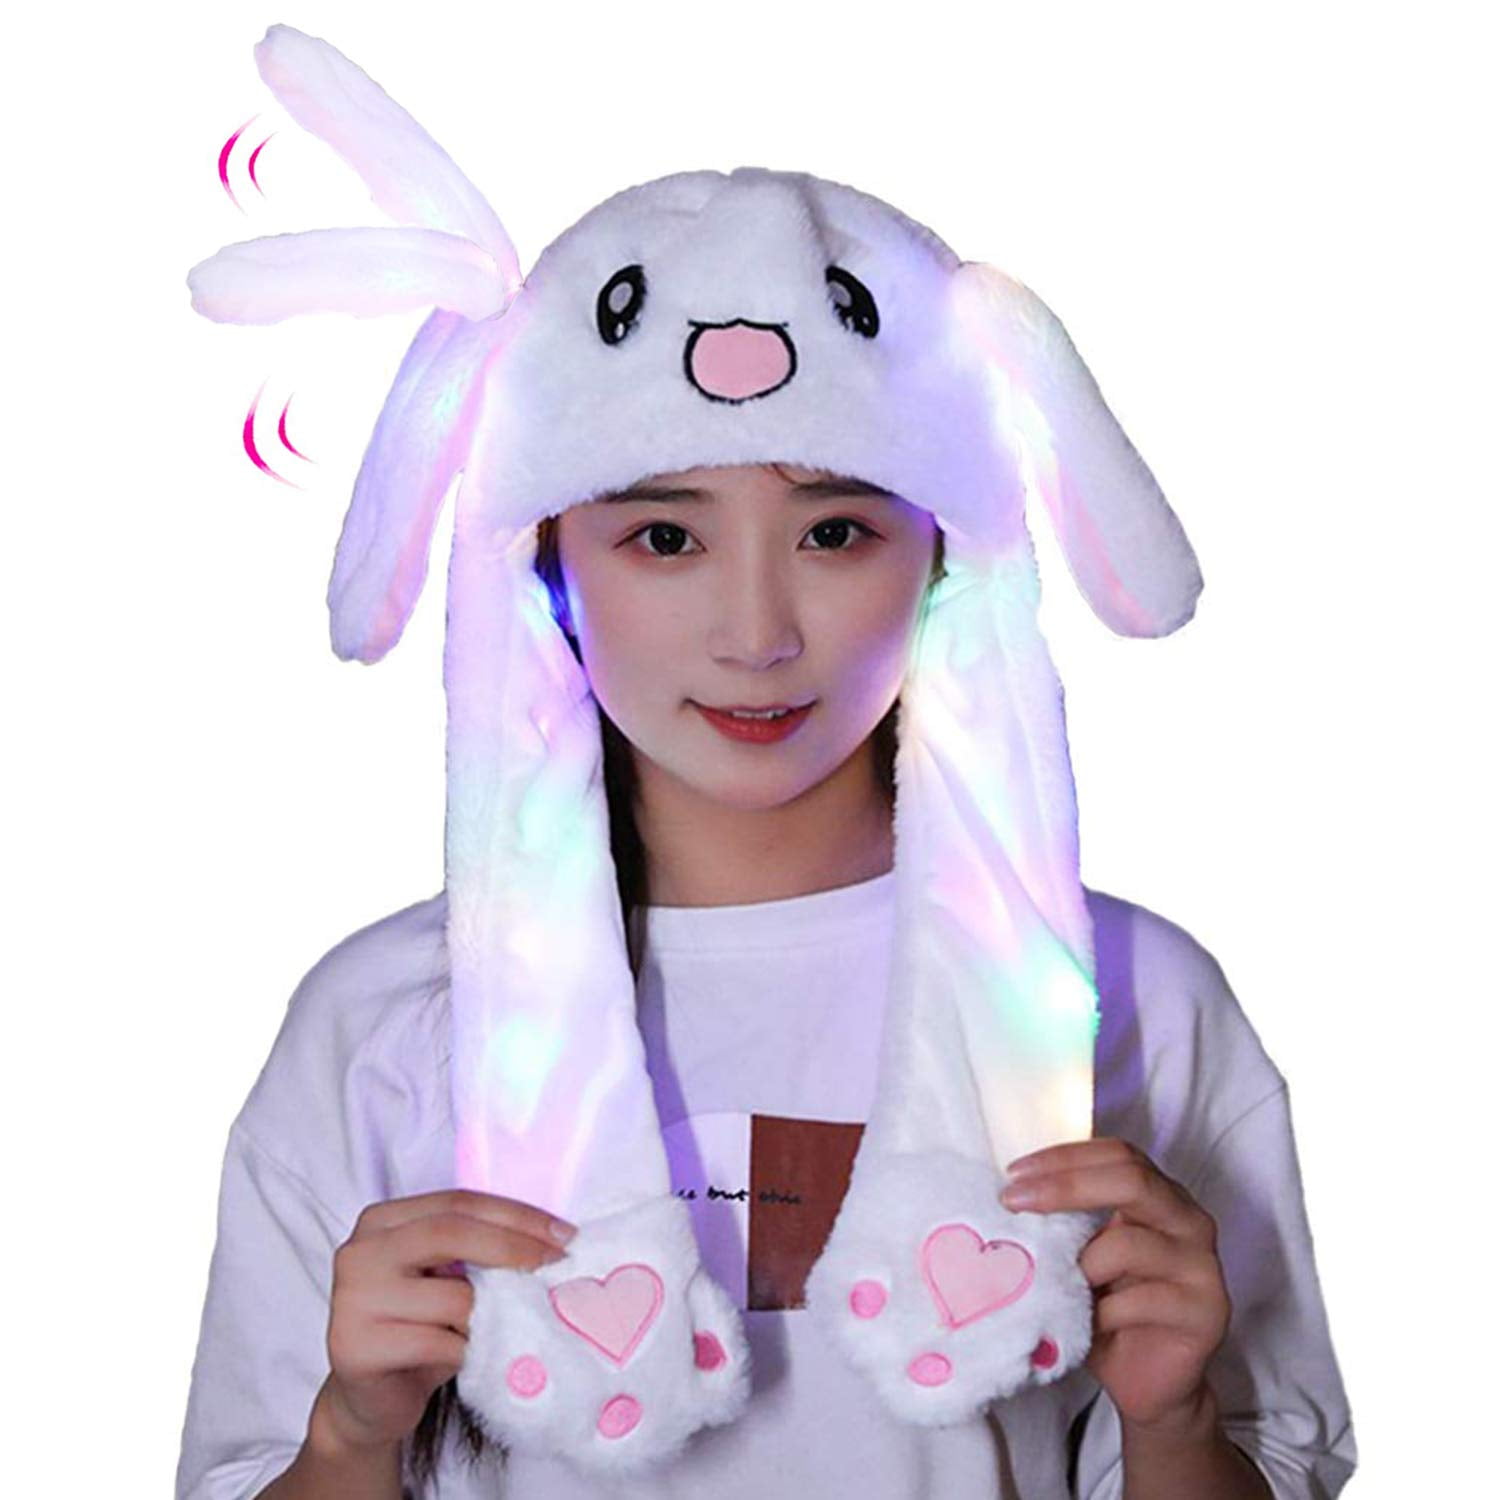 LED Glowing Plush Moving Rabbit Ear Hat,Girls Funny Plush Animal Ear Hat Toy With Moving Ears Pressing the Animal Cap Will Make the Ears Move Girls Boys Kids Women Cosplay Attractive Toys 